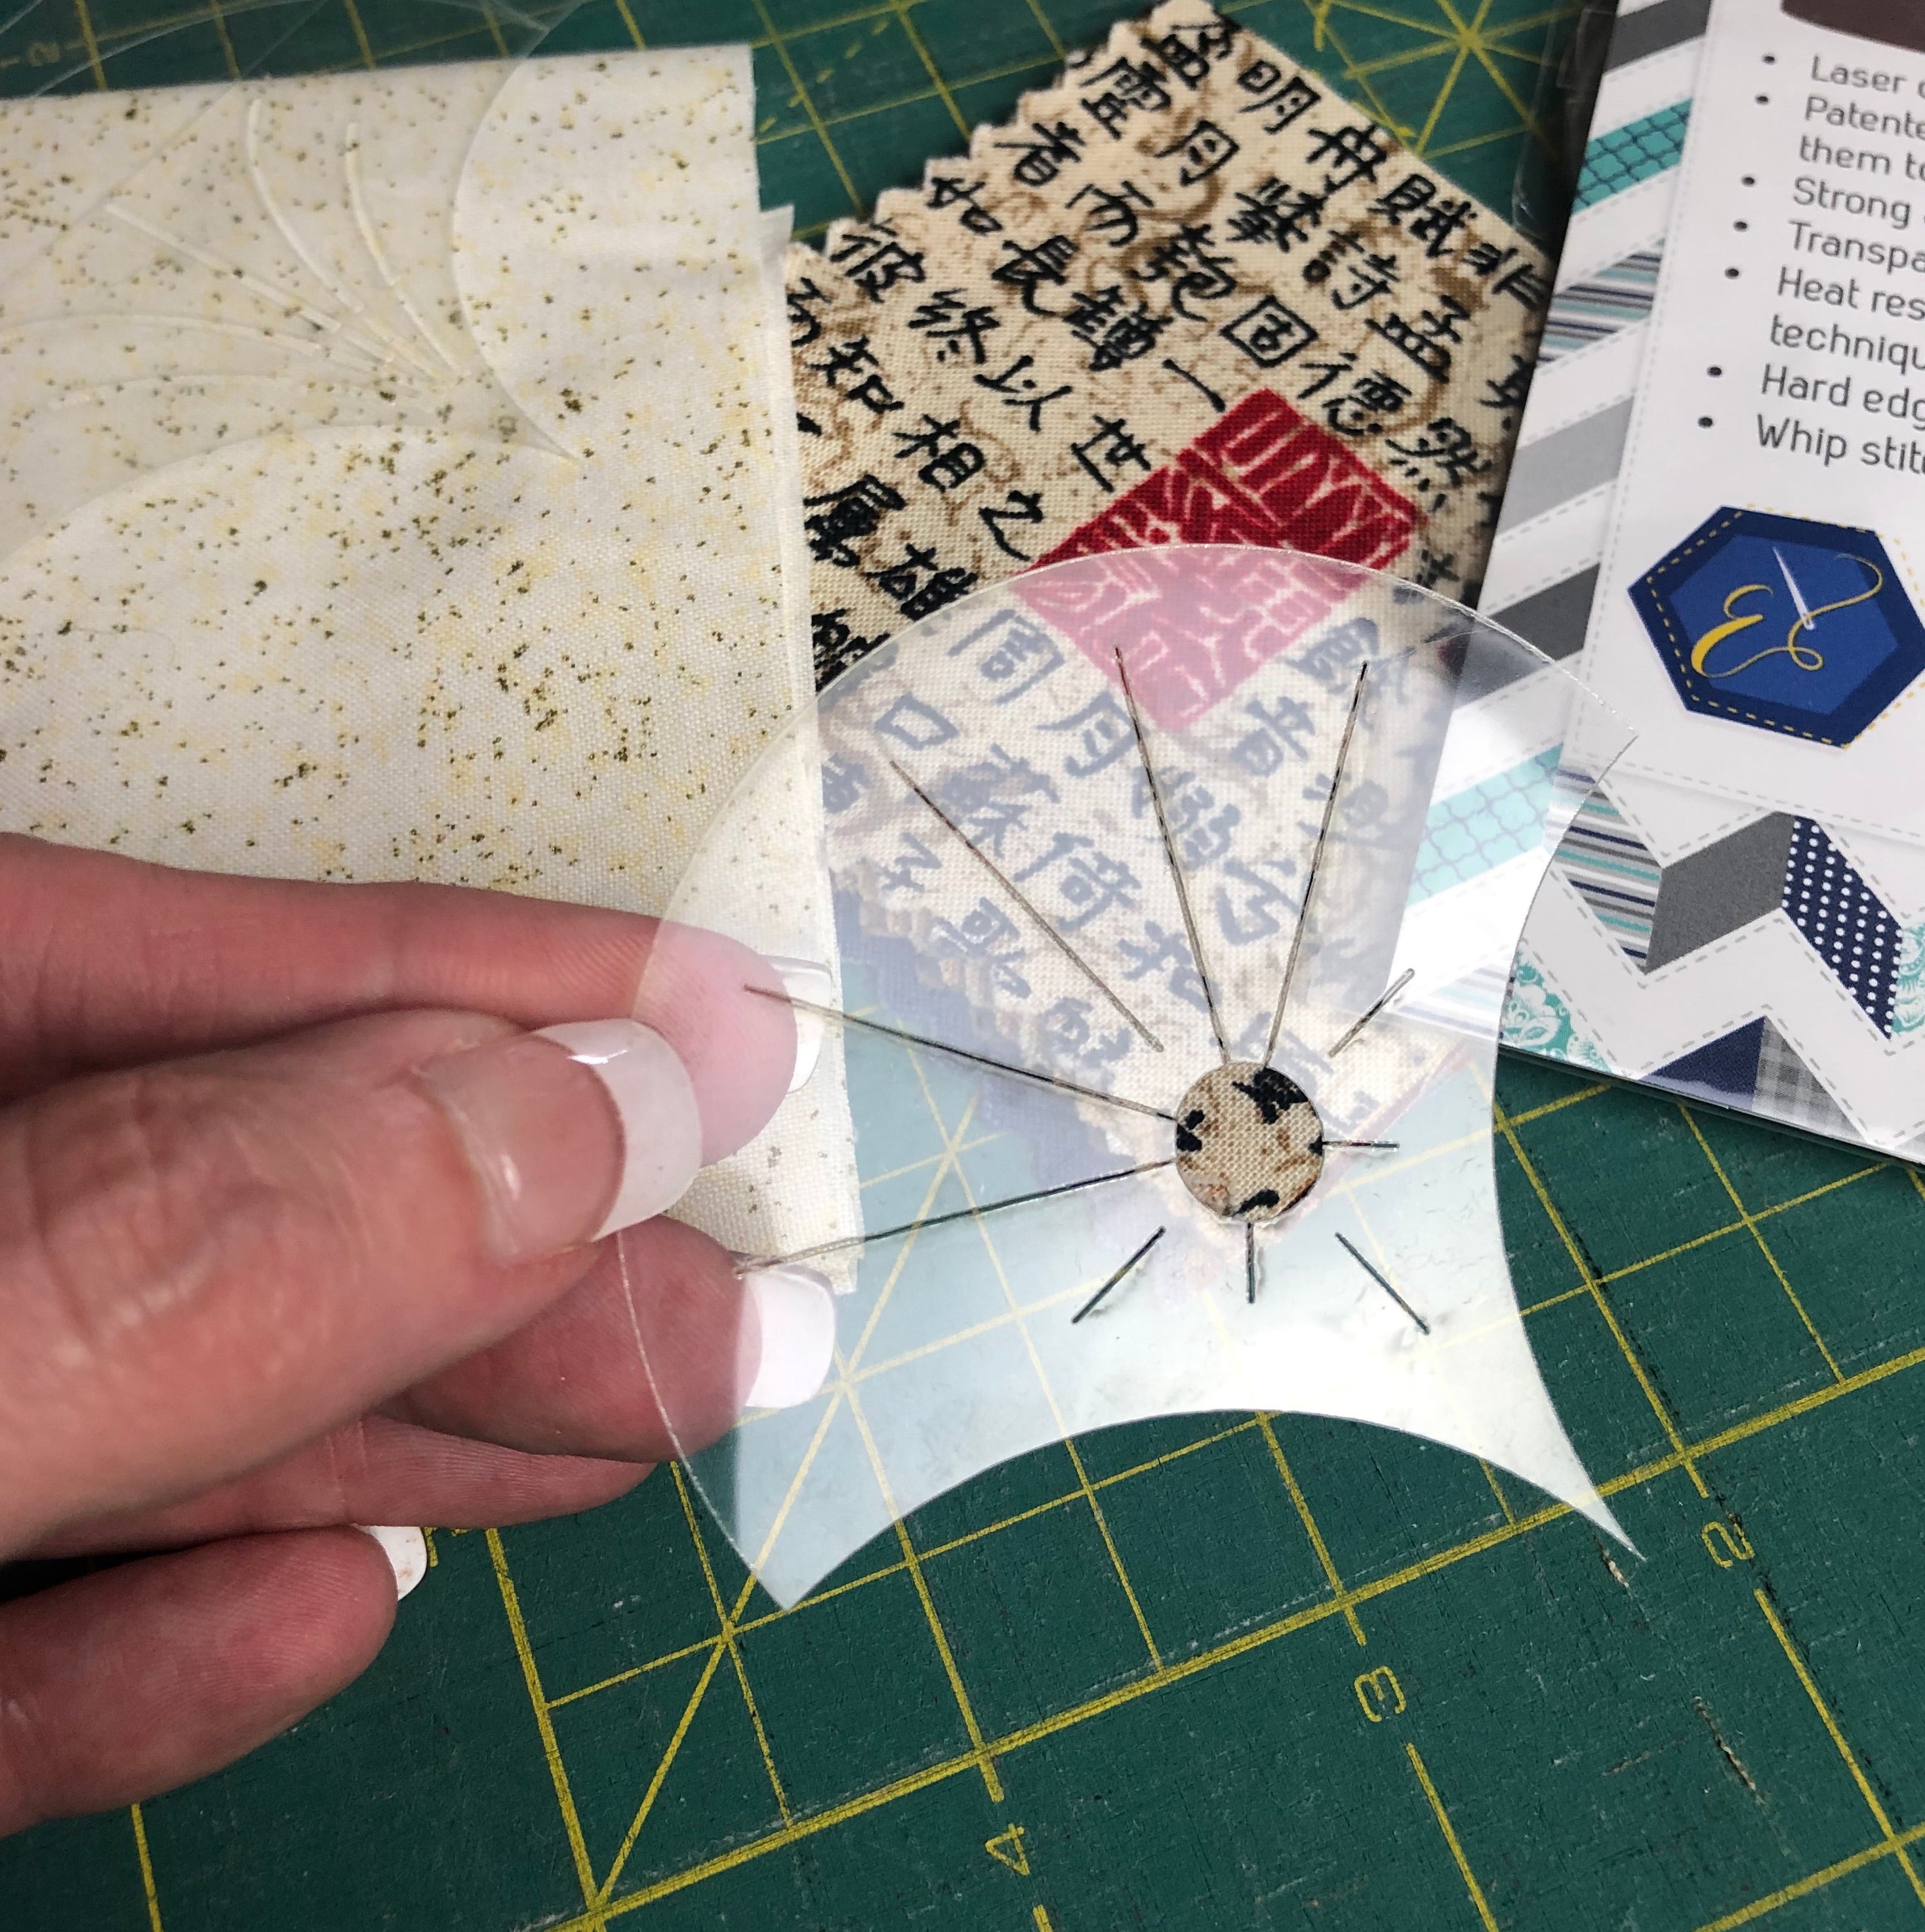 English Paper Piecing Template - Patchwork of the Crosses